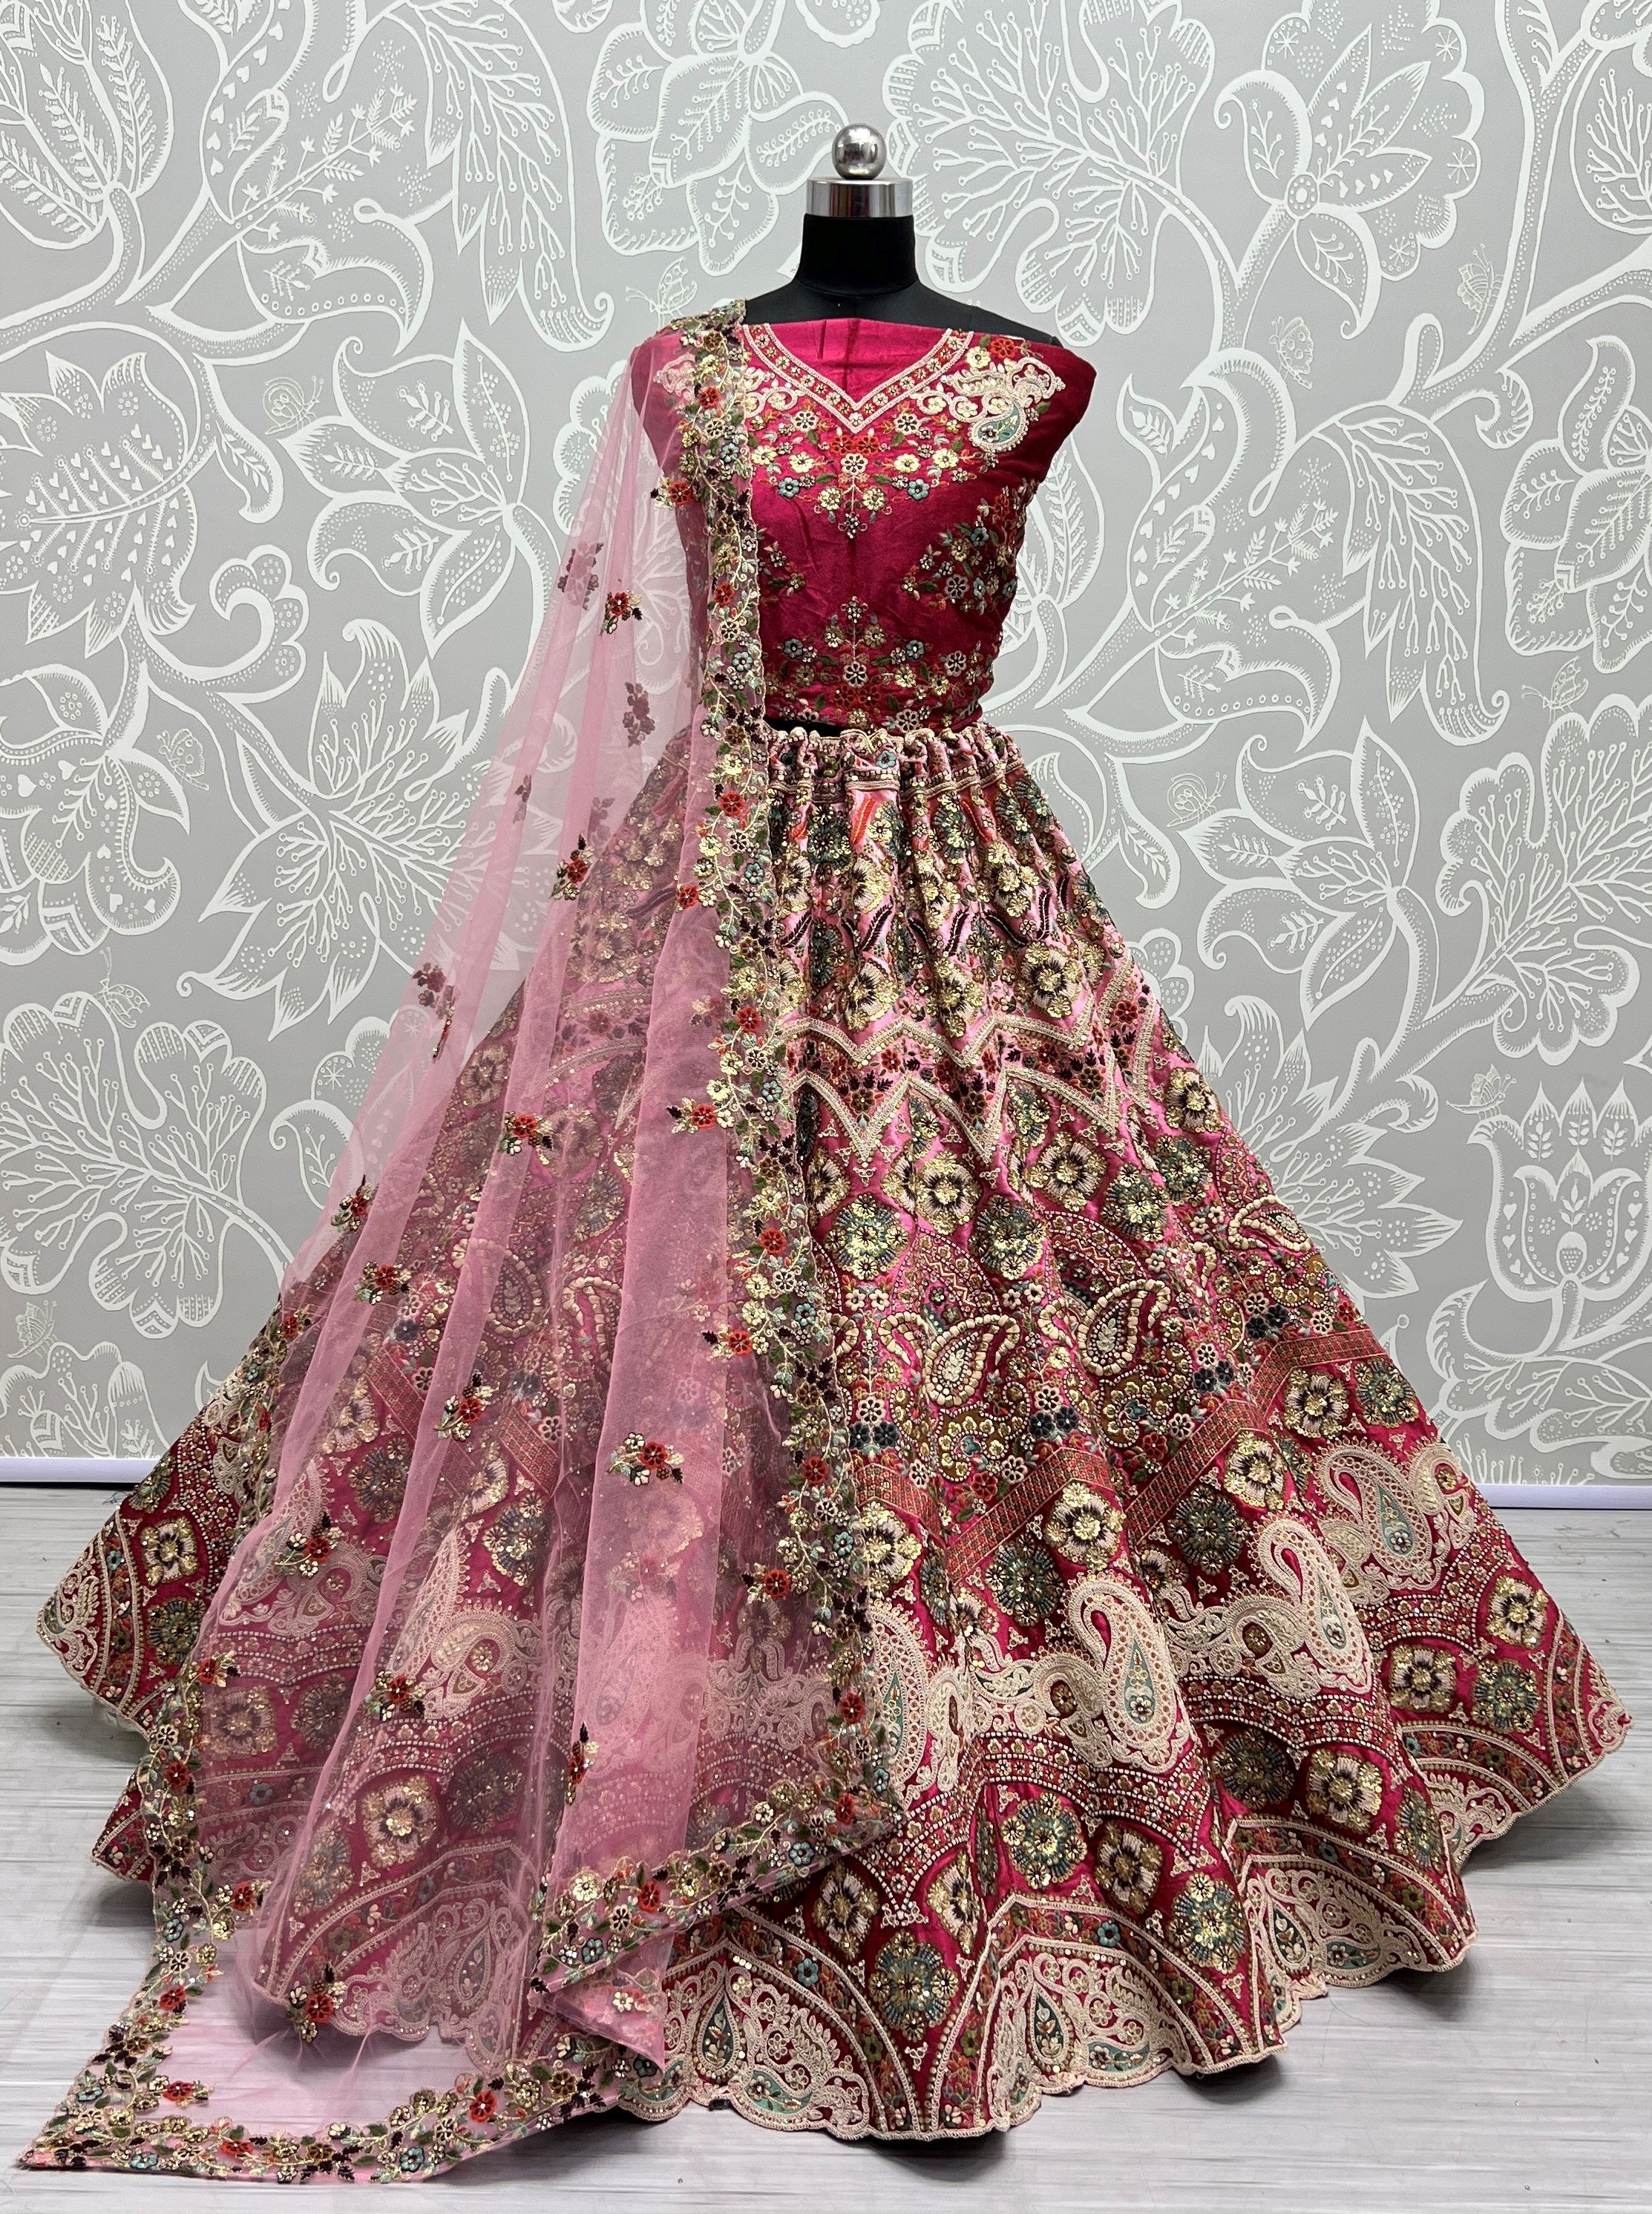 Stunning Designer Gowns by Manish Malhotra That You Need to Strut in for  Your Pre-Wedding | Indian wedding gowns, Indian dresses, Gowns